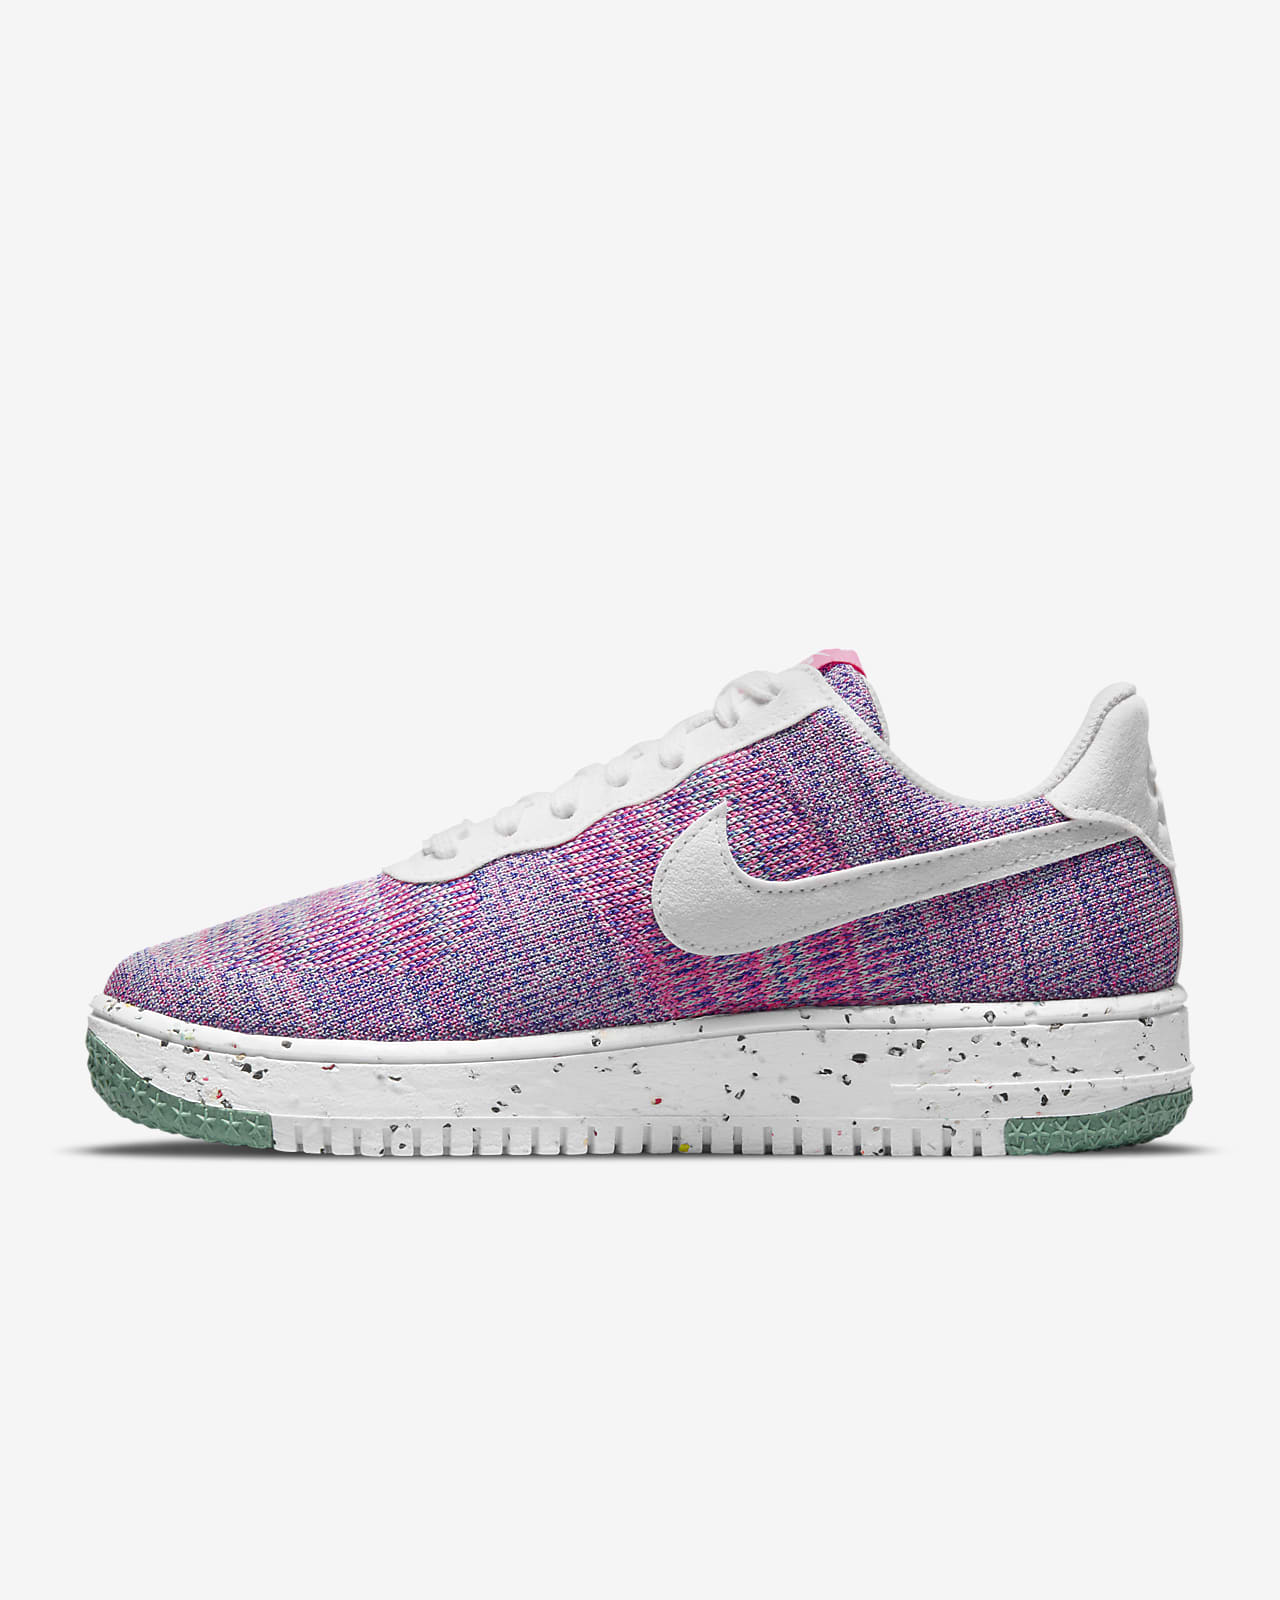 Incompatible Brewery get Nike Air Force 1 Crater FlyKnit Women's Shoe. Nike.com